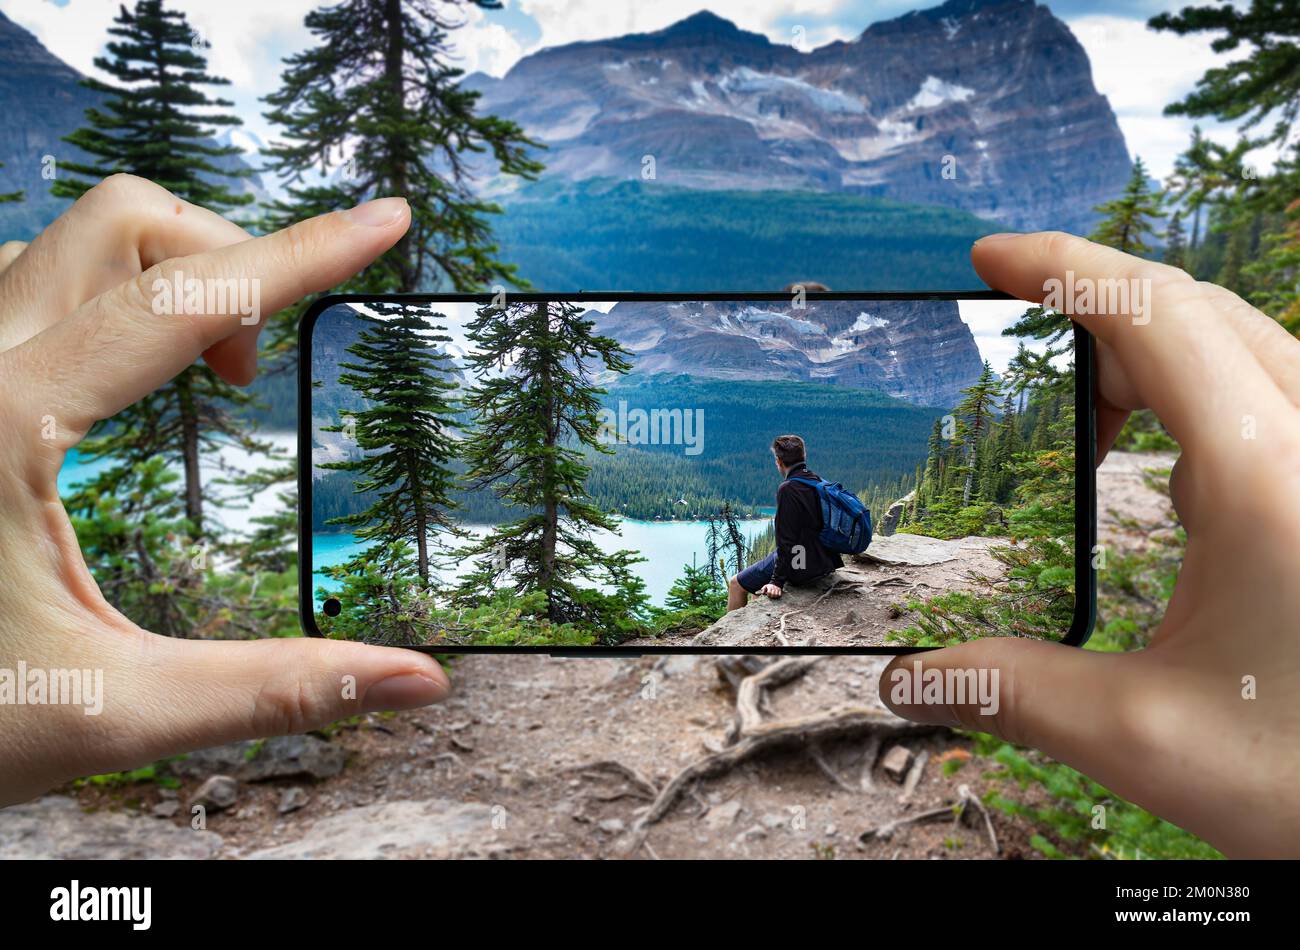 Tourist taking a picture with a mobile phone of a man resting at the lake Ohara, Canada. Stock Photo